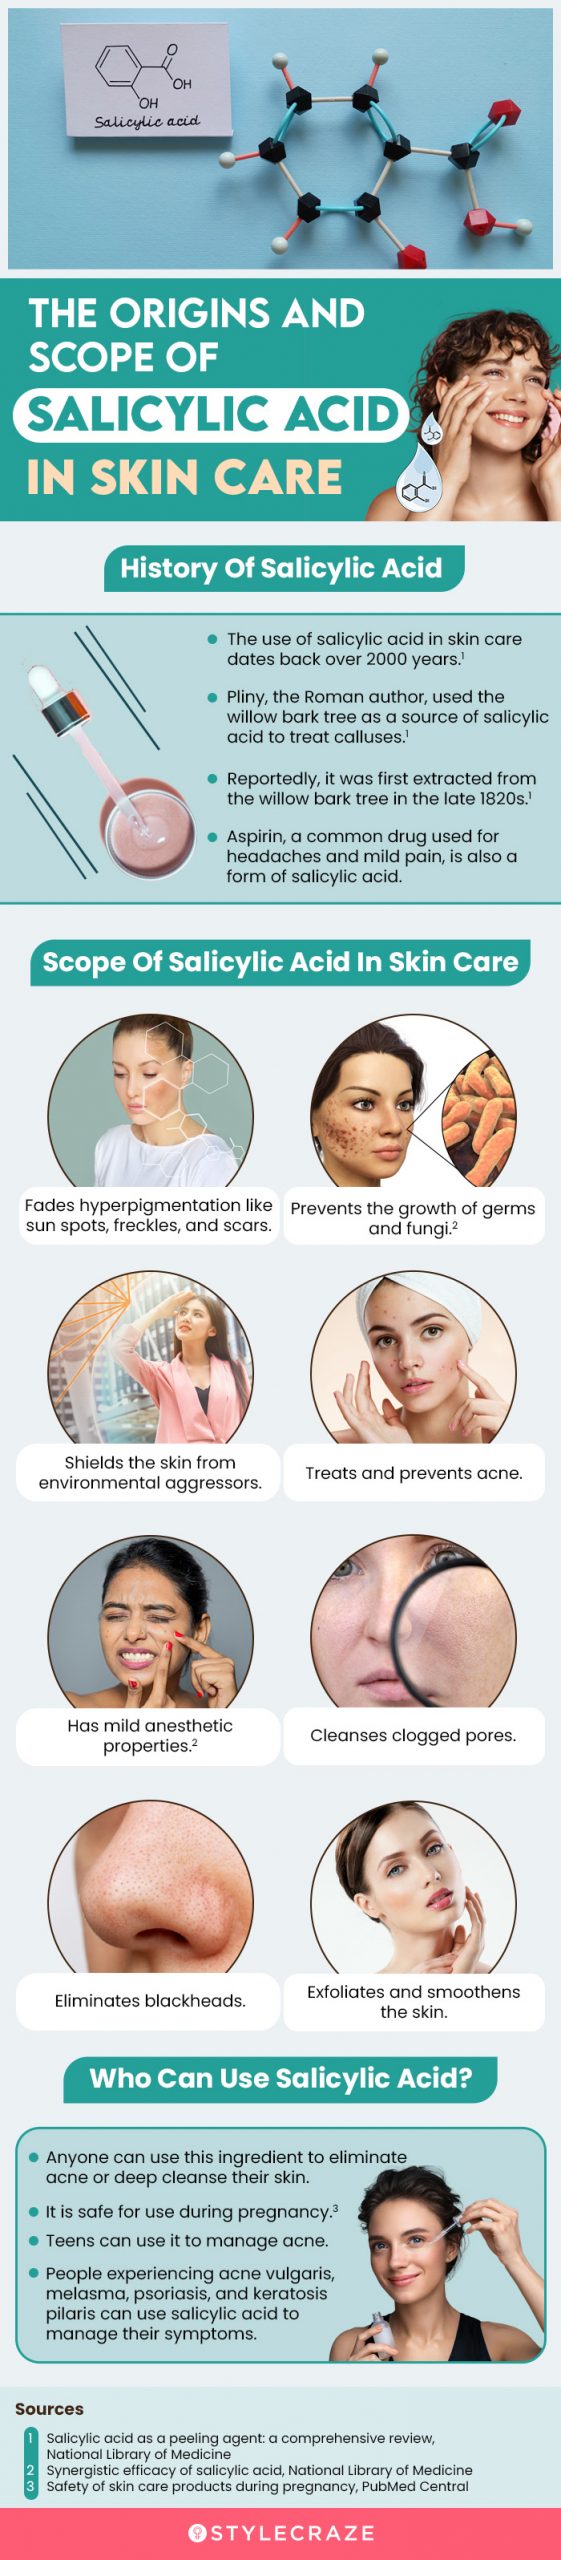 The Origins And Scope Of Salicylic Acid In Skin Care (infographic)